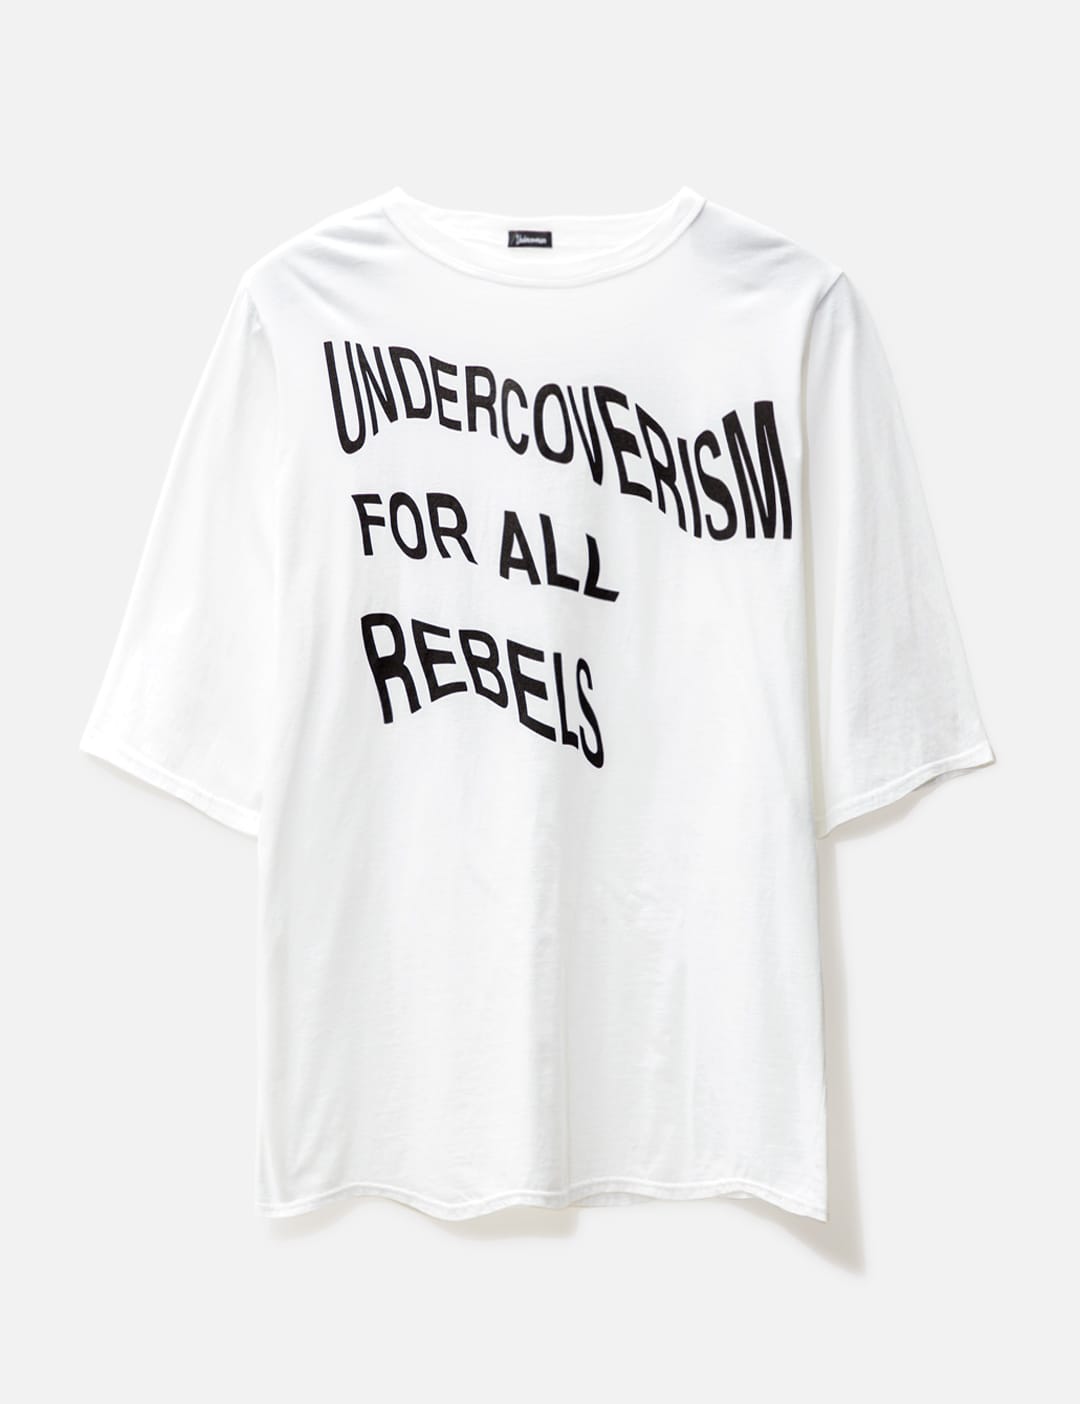 Undercoverism - For All Rebels T-shirt | HBX - Globally Curated